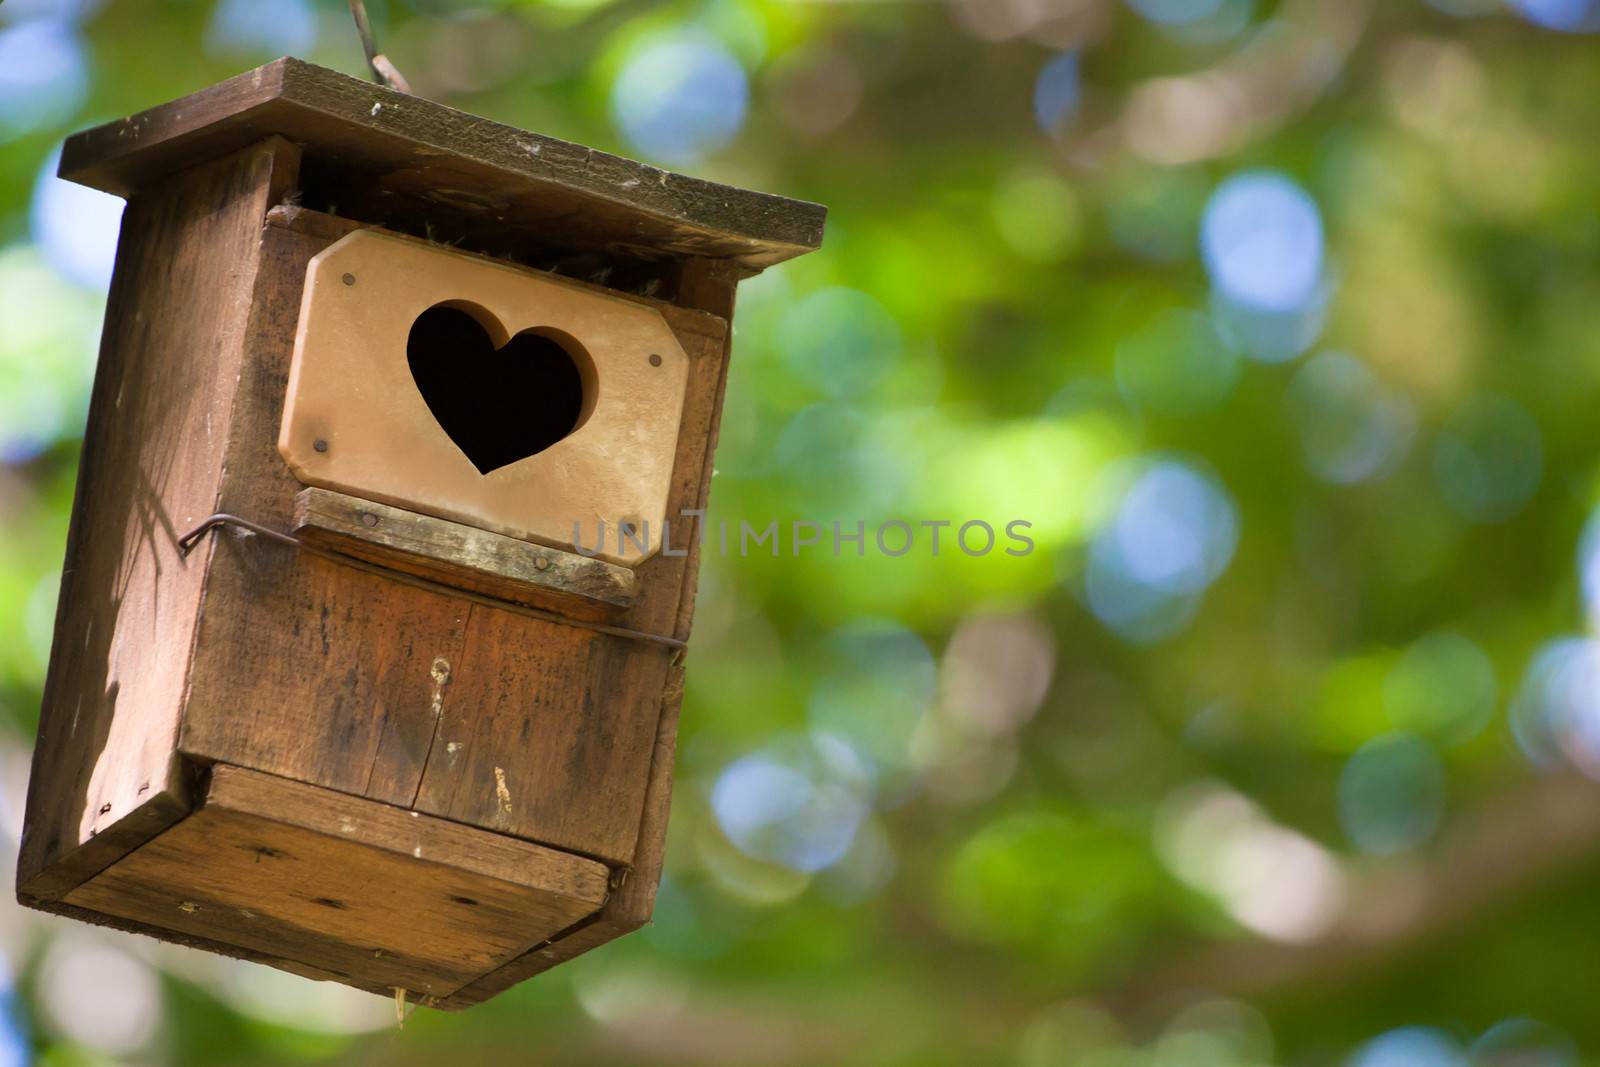 Bird house hanging from the tree with the entrance hole in the shape of a heart.